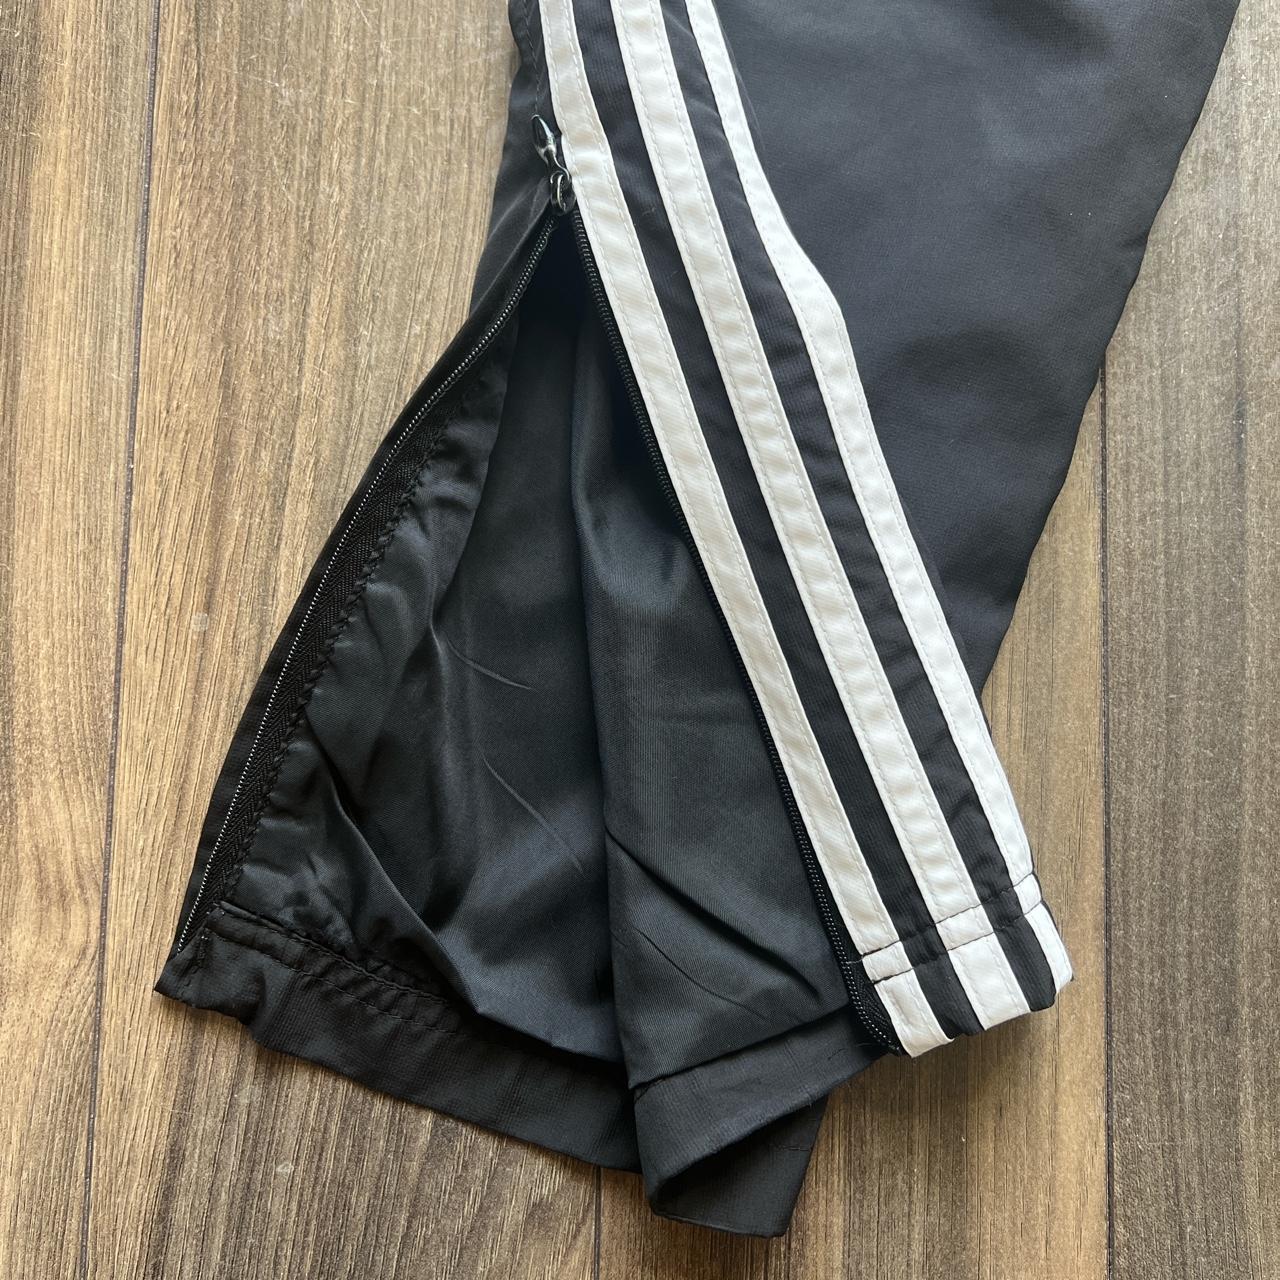 Adidas Women's Black and White Joggers-tracksuits (4)